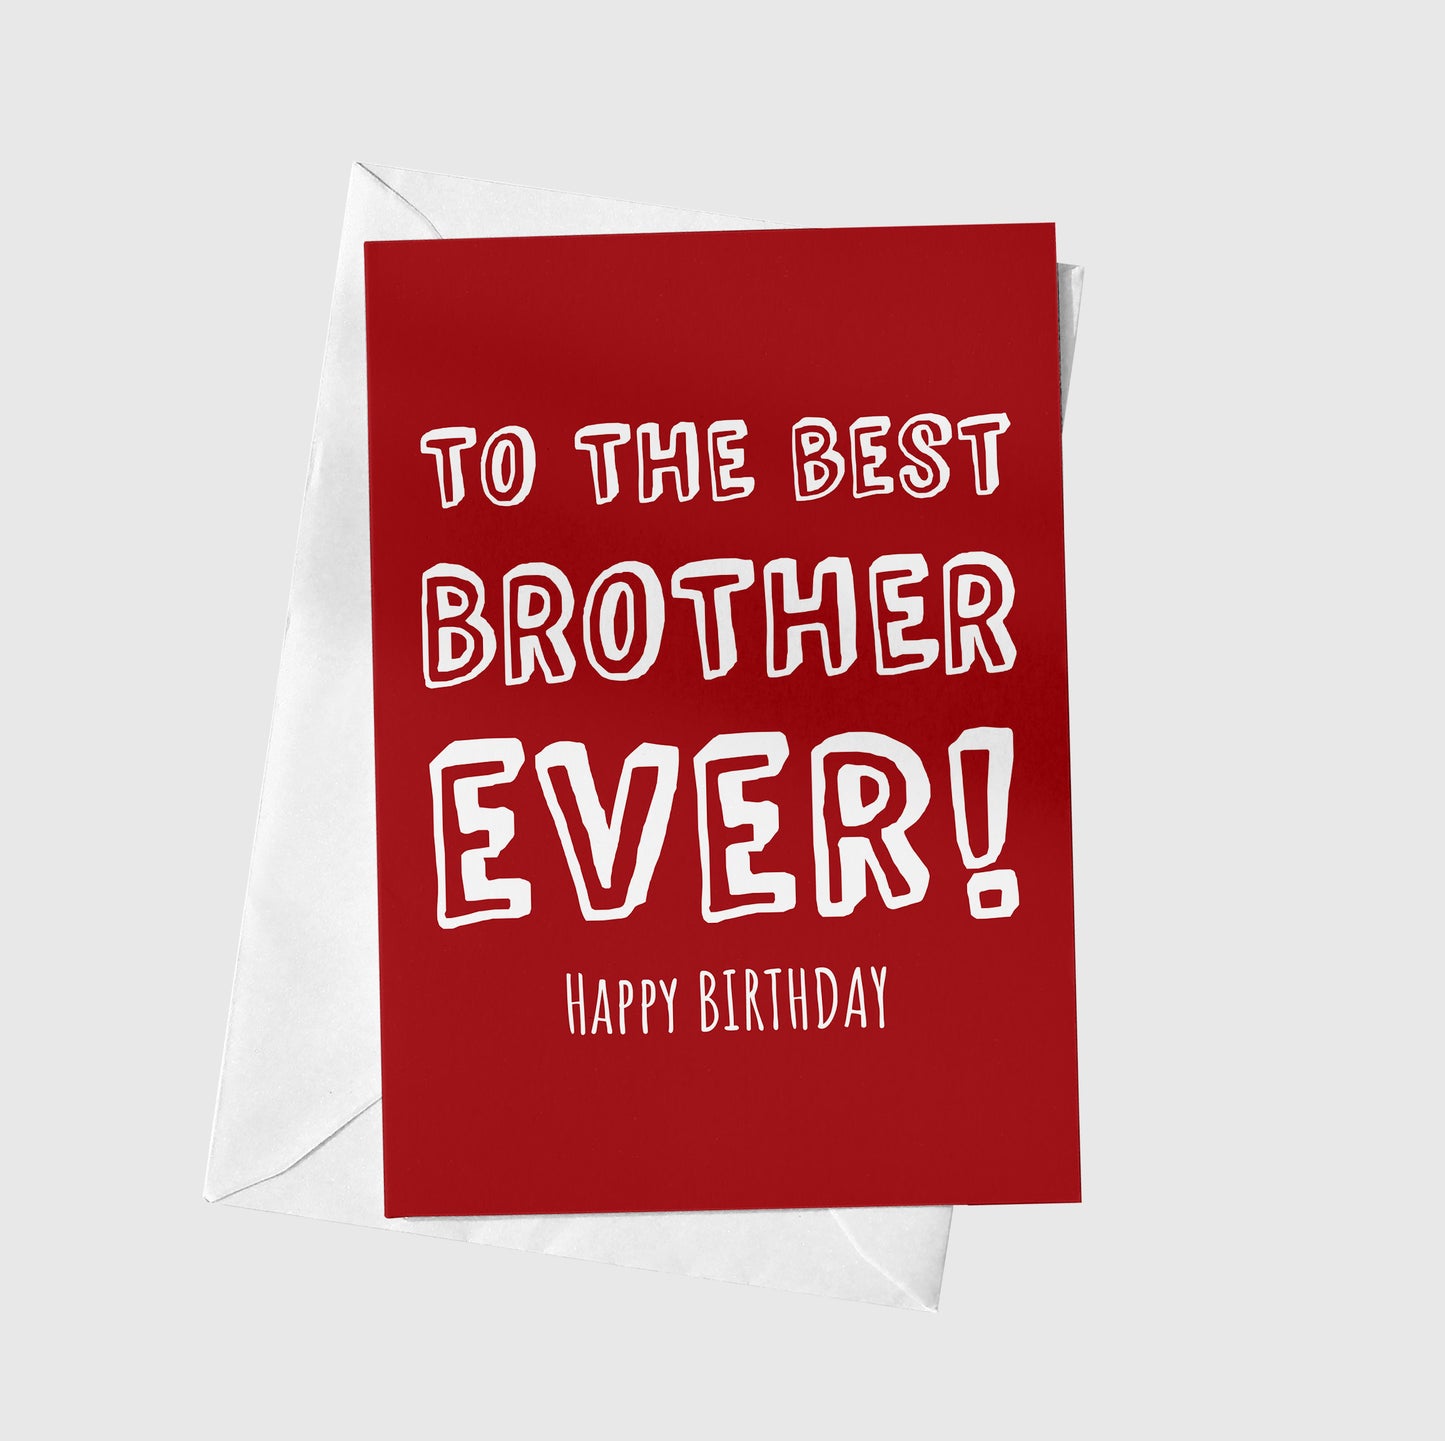 To The Best Brother Ever!